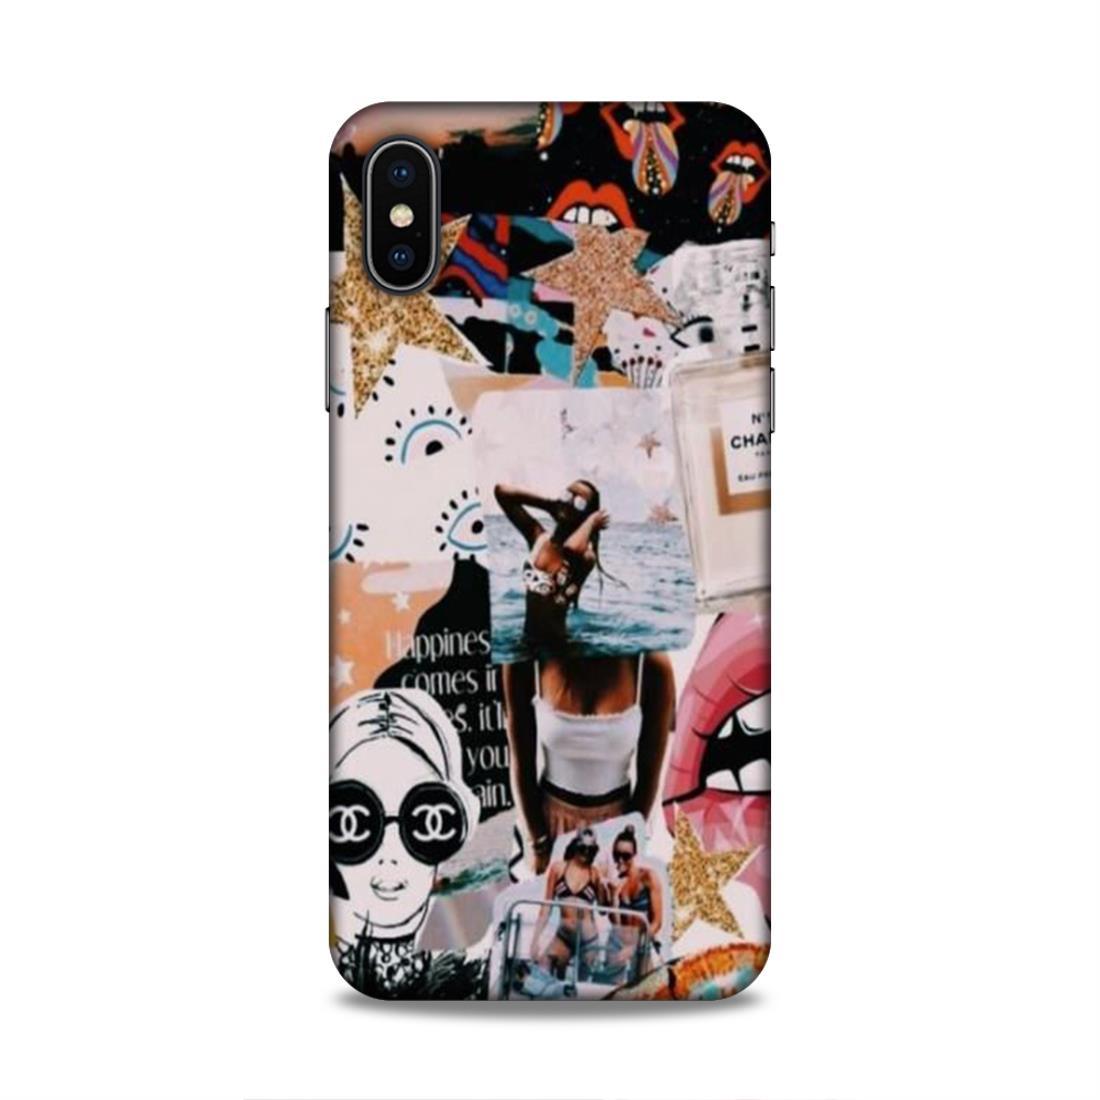 Happy Girl iPhone XS Mobile Case Cover